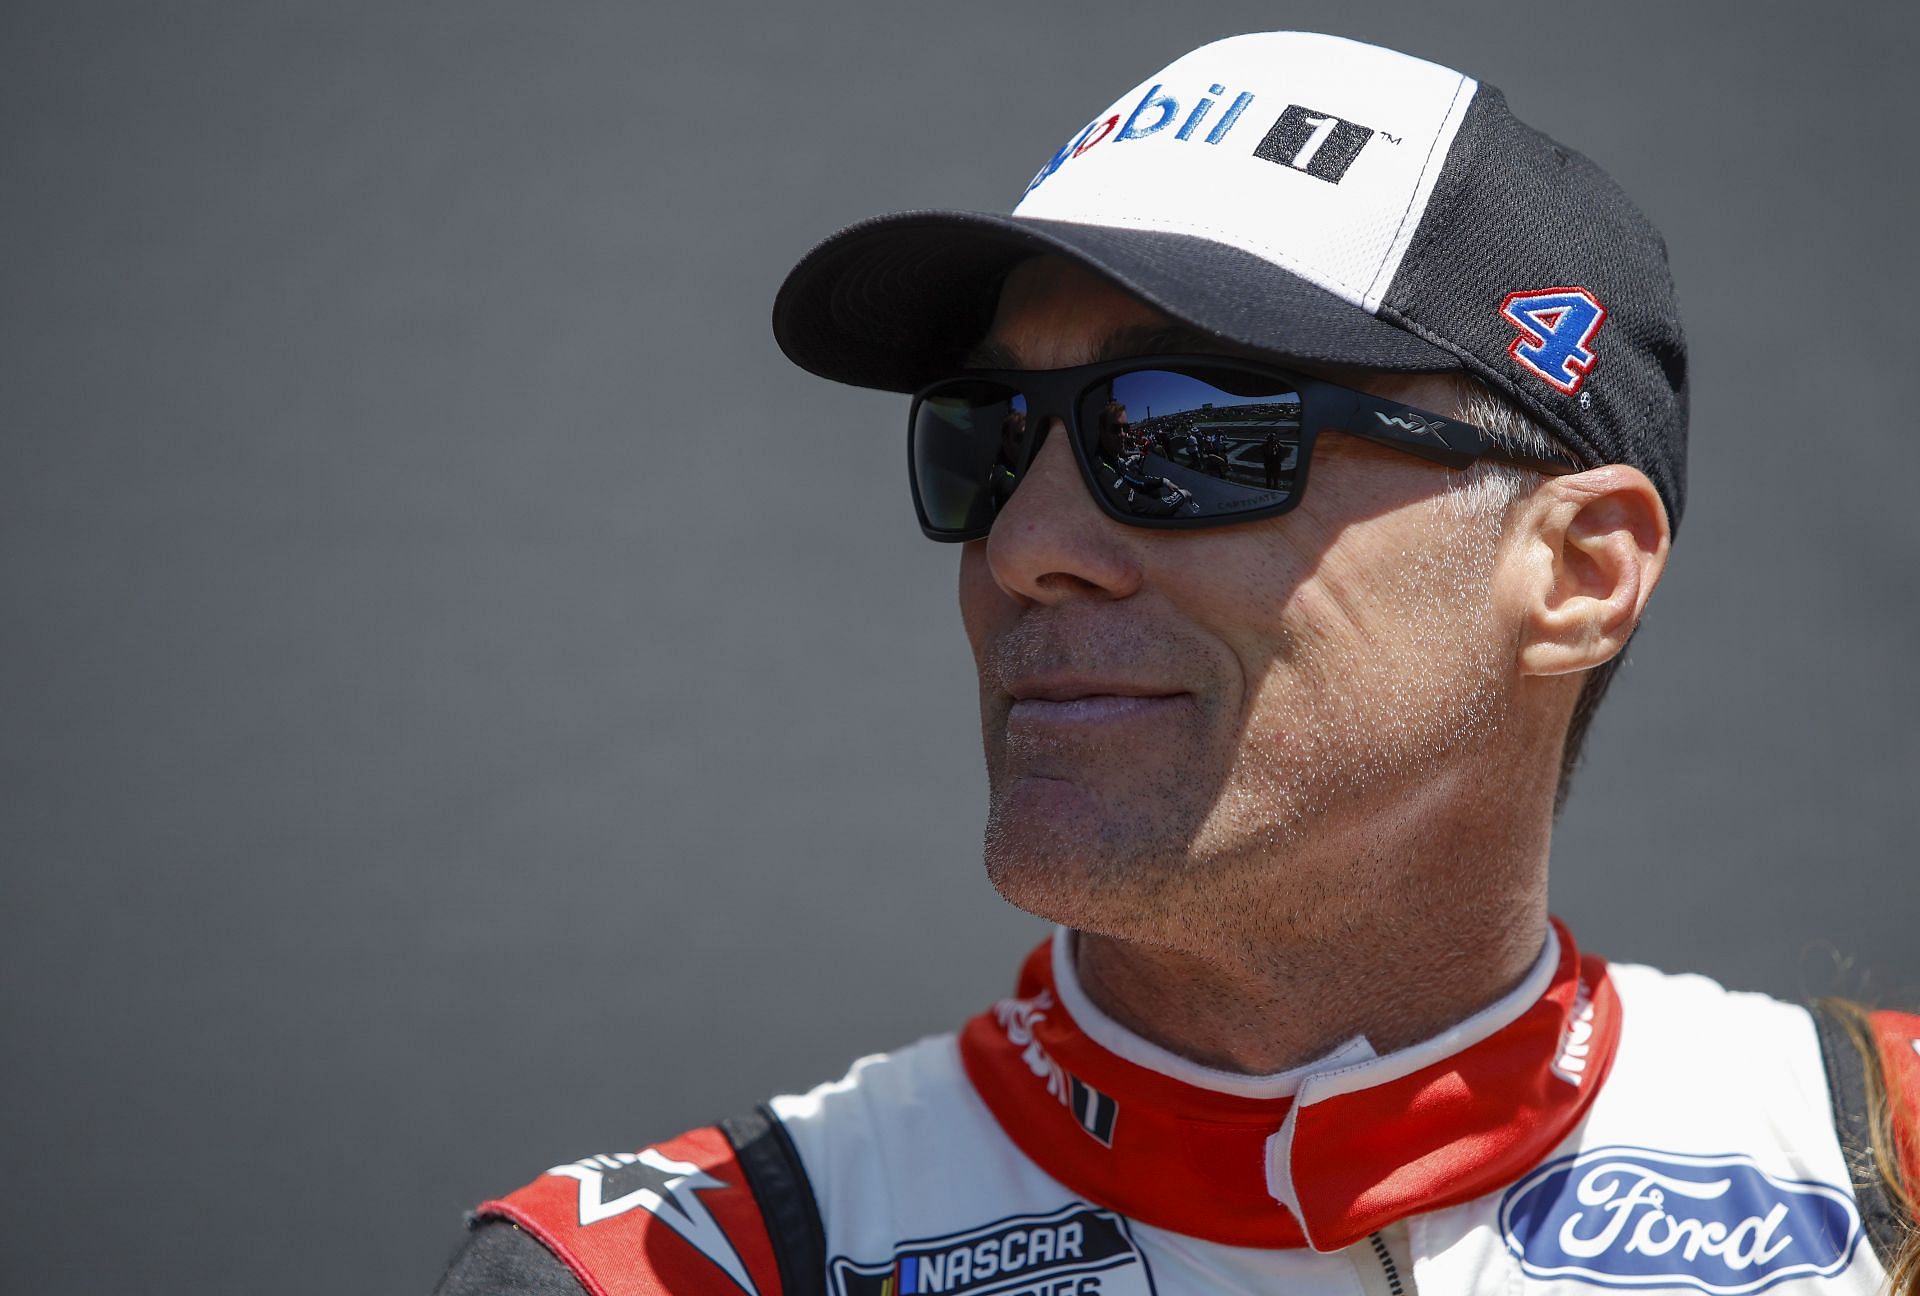 Kevin Harvick waits backstage during driver intros prior to the NASCAR Cup Series Folds of Honor QuikTrip 500 at Atlanta Motor Speedway.